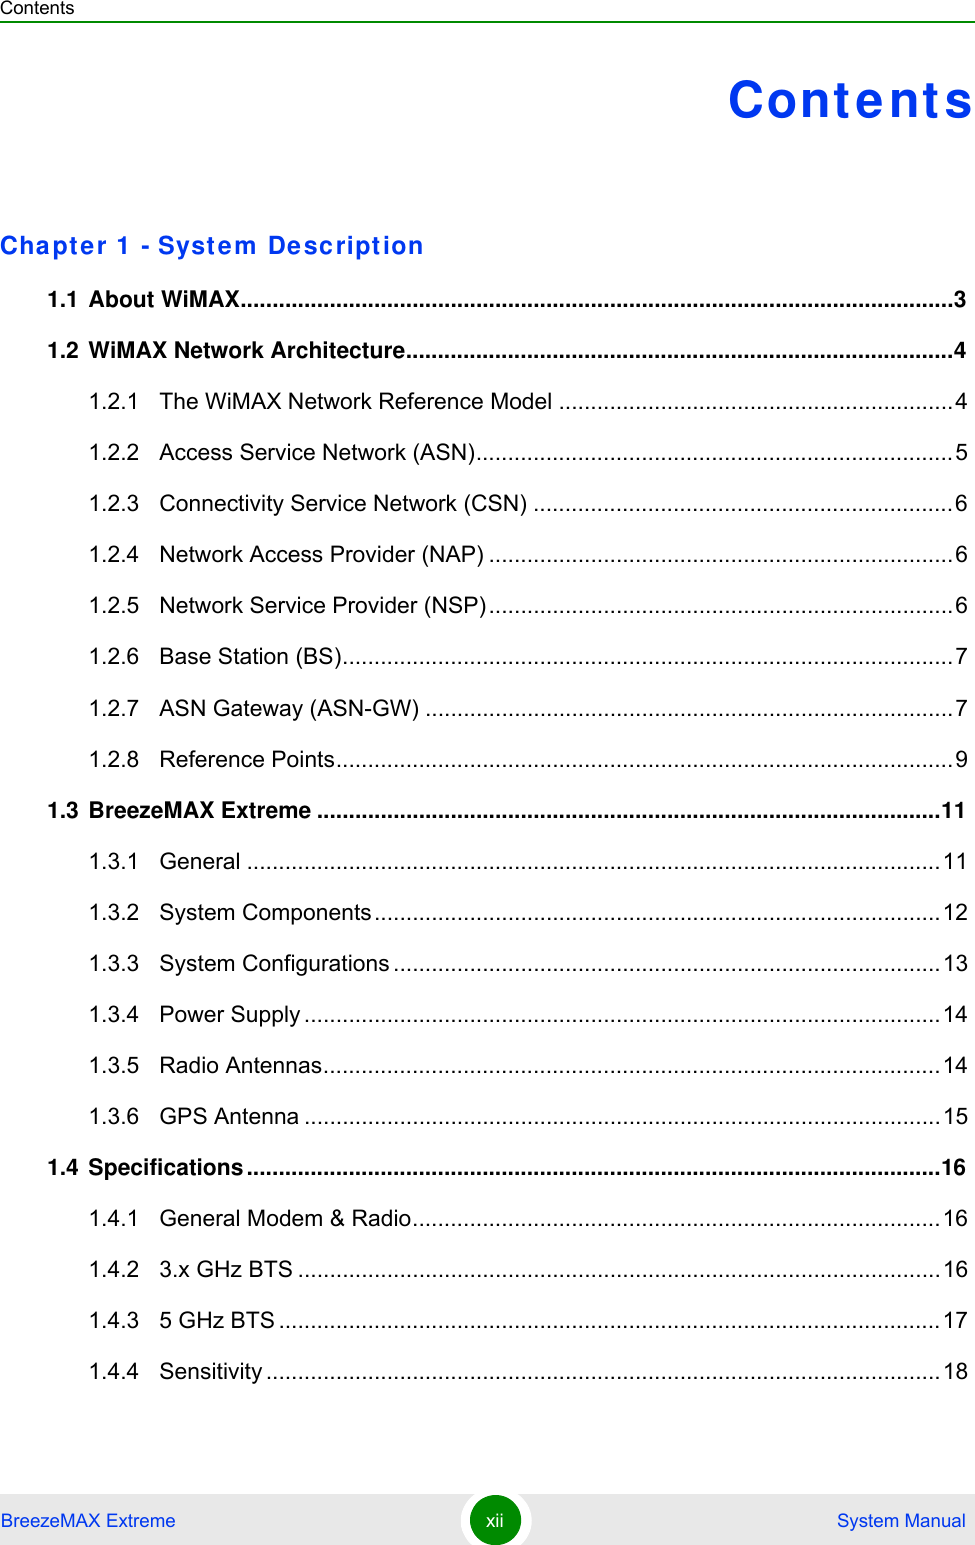 ContentsBreezeMAX Extreme xii  System ManualContentsChapte r 1  - Syst em De script ion1.1 About WiMAX................................................................................................................31.2 WiMAX Network Architecture......................................................................................41.2.1 The WiMAX Network Reference Model ..............................................................41.2.2 Access Service Network (ASN)...........................................................................51.2.3 Connectivity Service Network (CSN) ..................................................................61.2.4 Network Access Provider (NAP) .........................................................................61.2.5 Network Service Provider (NSP).........................................................................61.2.6 Base Station (BS)................................................................................................71.2.7 ASN Gateway (ASN-GW) ...................................................................................71.2.8 Reference Points.................................................................................................91.3 BreezeMAX Extreme ..................................................................................................111.3.1 General .............................................................................................................111.3.2 System Components.........................................................................................121.3.3 System Configurations ......................................................................................131.3.4 Power Supply ....................................................................................................141.3.5 Radio Antennas.................................................................................................141.3.6 GPS Antenna ....................................................................................................151.4 Specifications .............................................................................................................161.4.1 General Modem &amp; Radio...................................................................................161.4.2 3.x GHz BTS .....................................................................................................161.4.3 5 GHz BTS ........................................................................................................171.4.4 Sensitivity ..........................................................................................................18